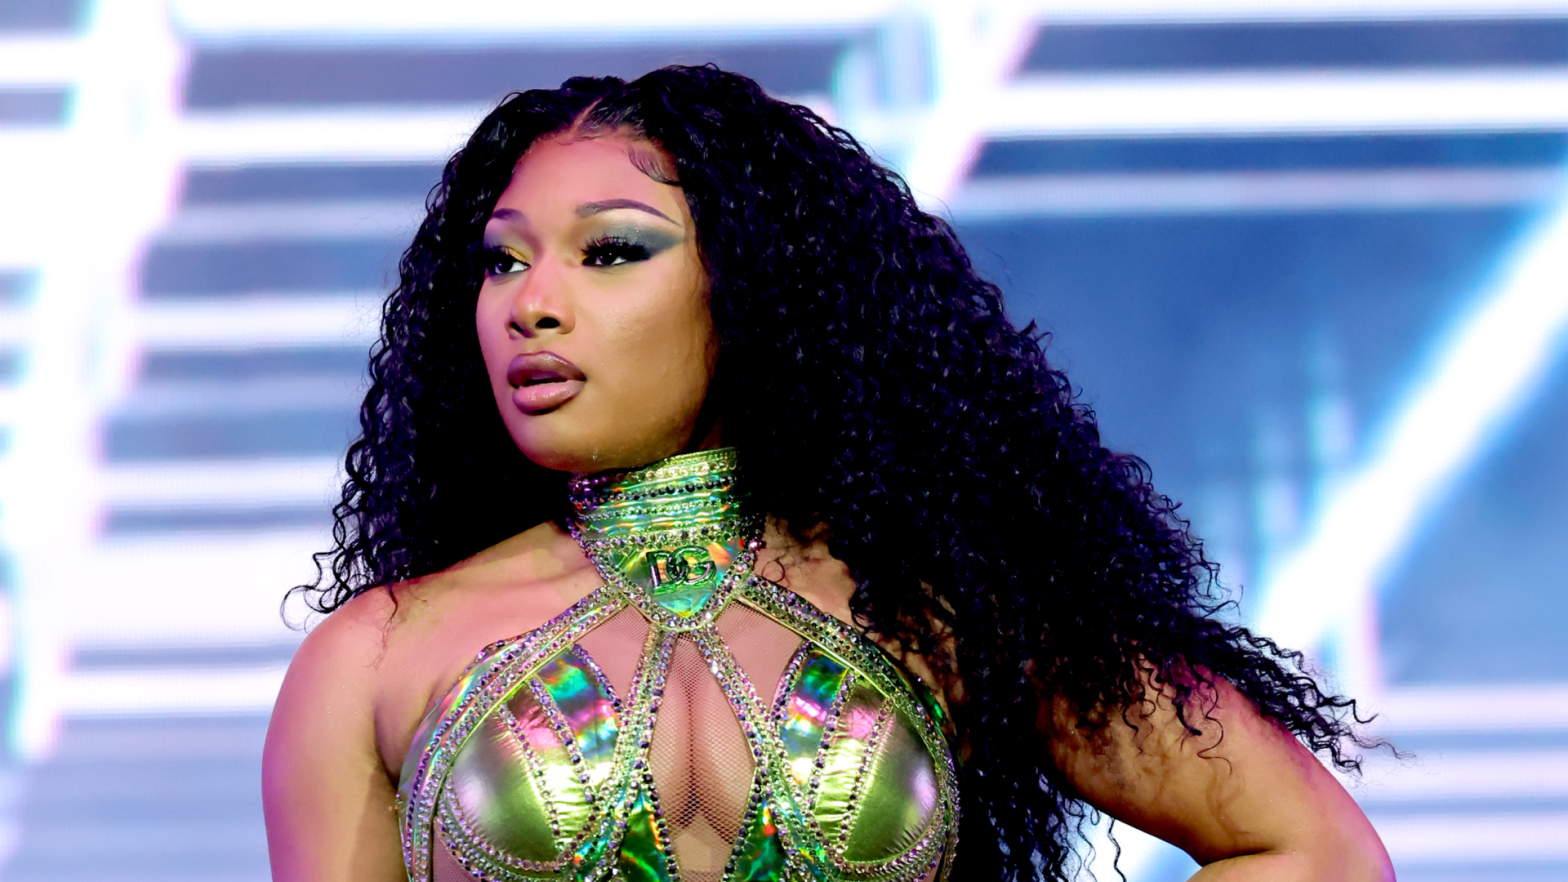 Face Card: The Top 5 Moments Megan Thee Stallion's Beauty Caught Our Attention